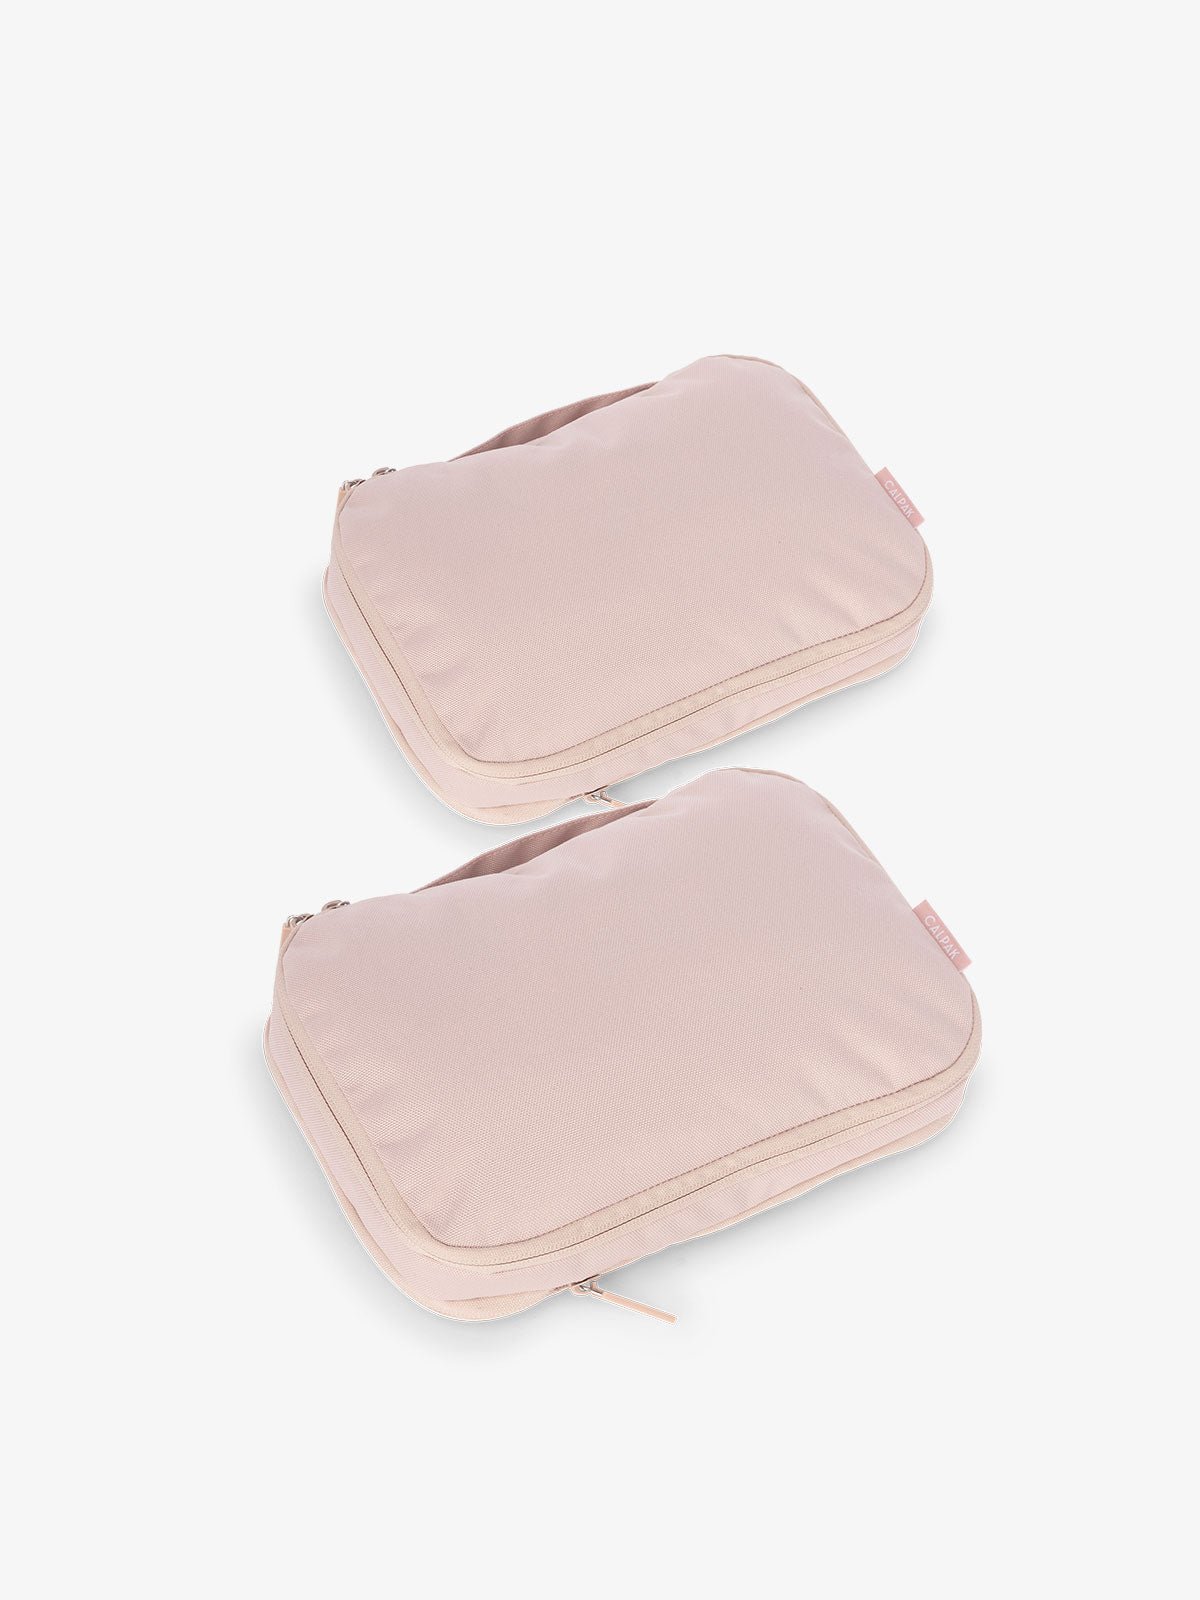 CALPAK small compression packing cubes in pink sand